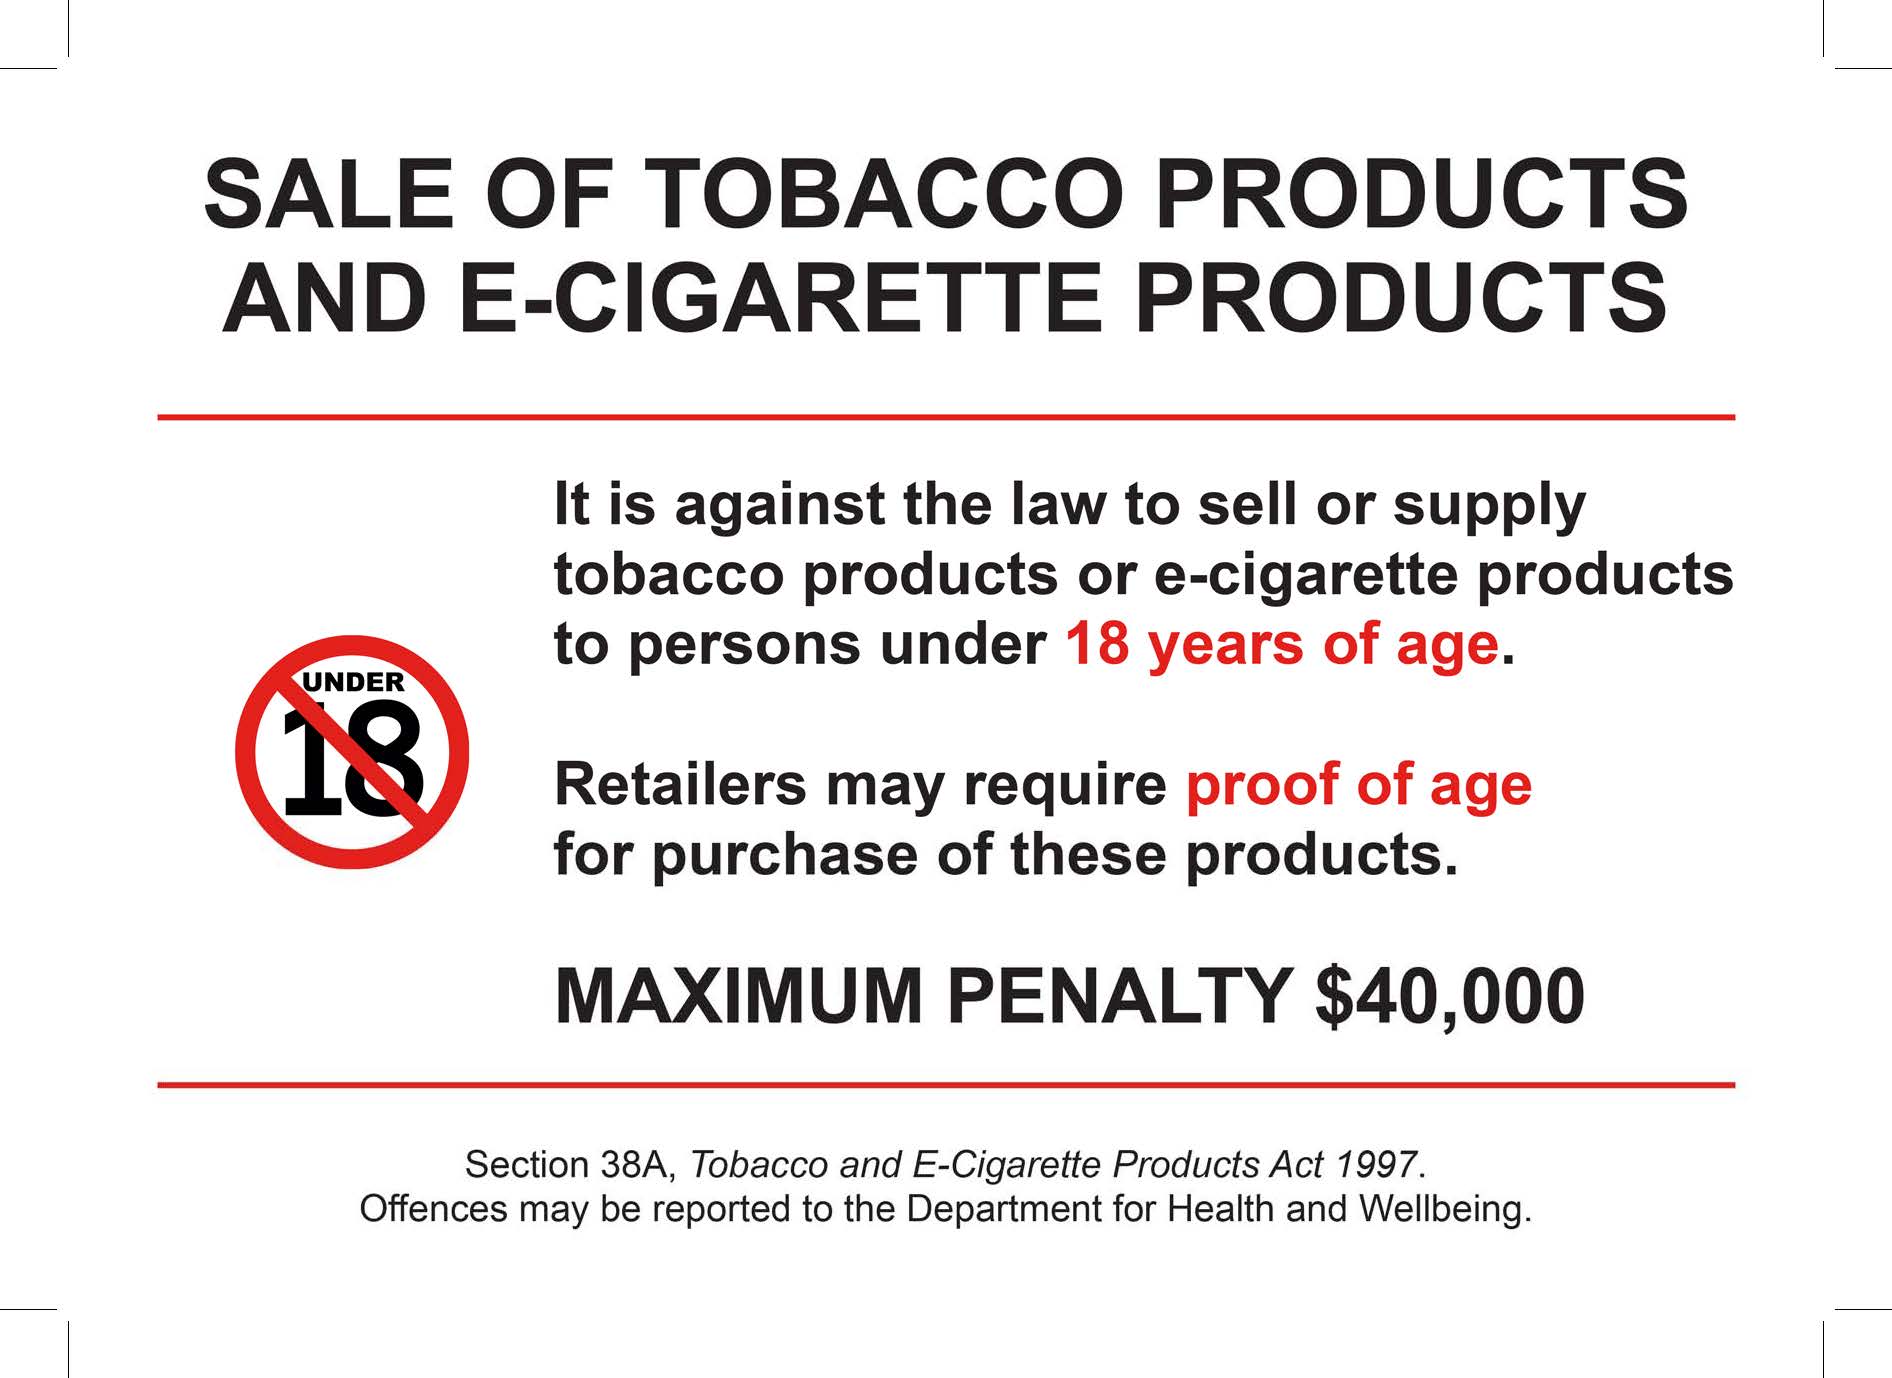 Sign for point of sale indicating tobacco sales to under 18 year olds is against the law